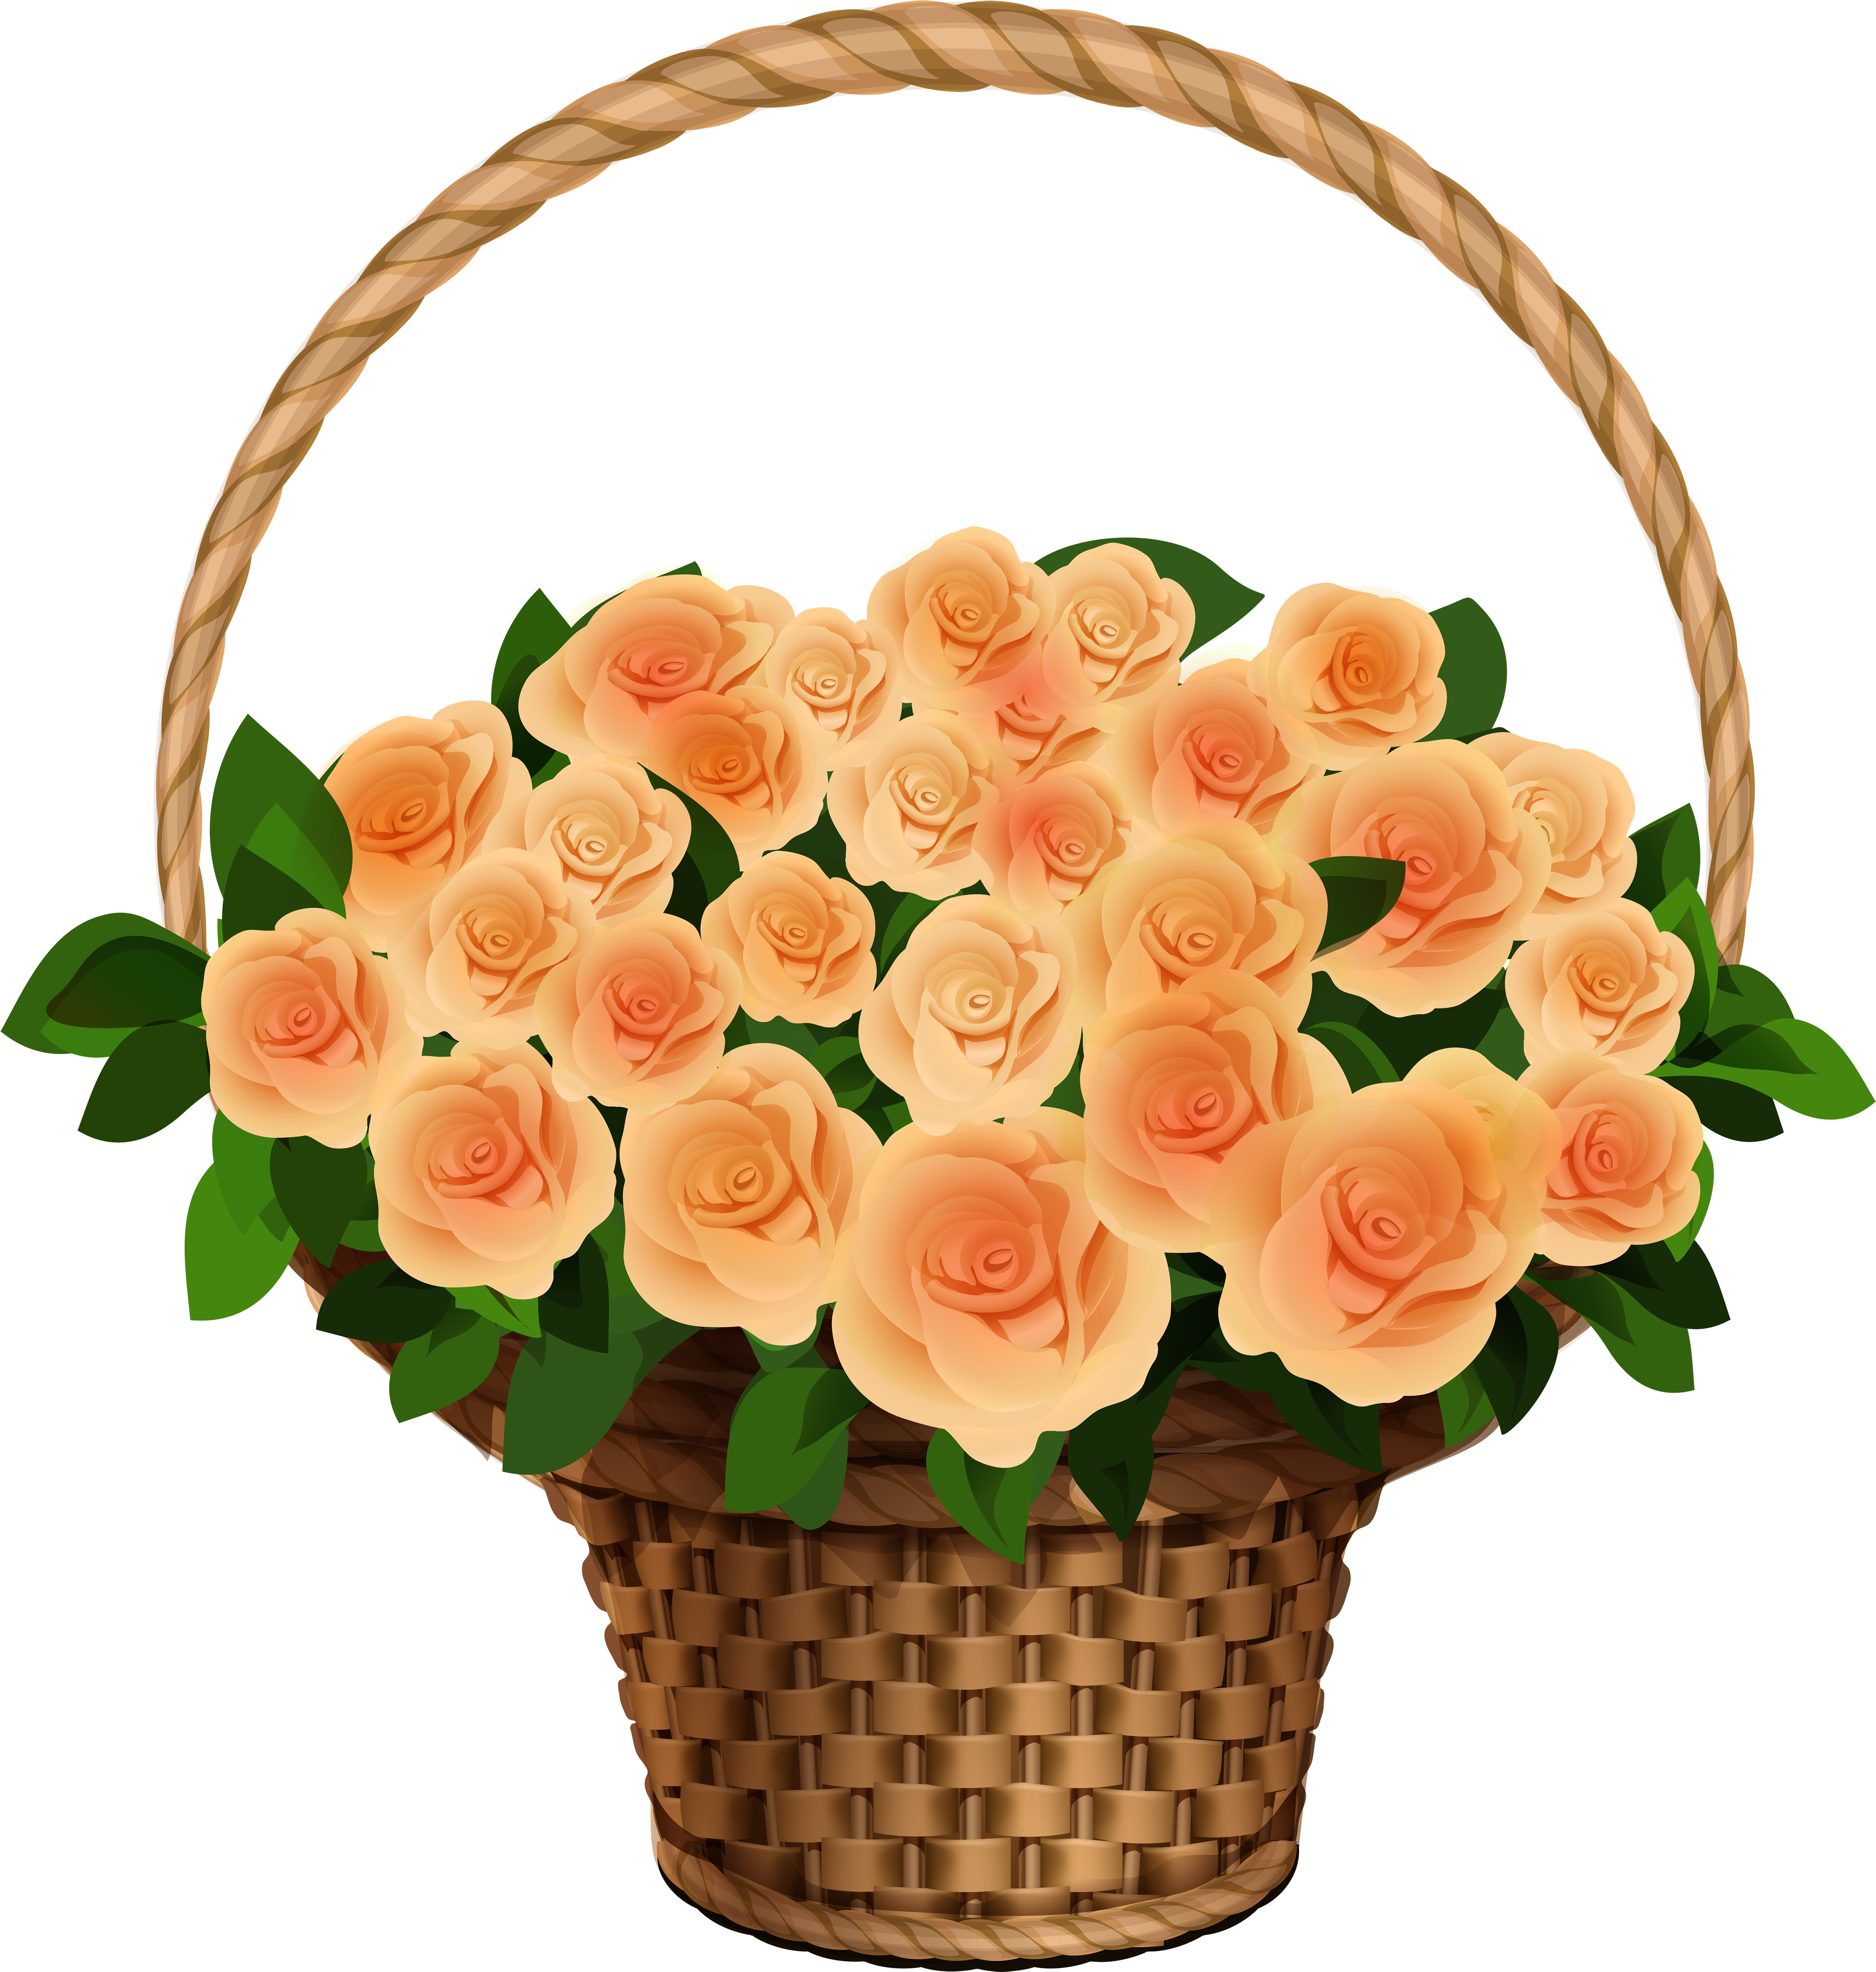 Basket With Yellow Roses Png Clipart Image - Flower Bokeh Png Hd Transparen...